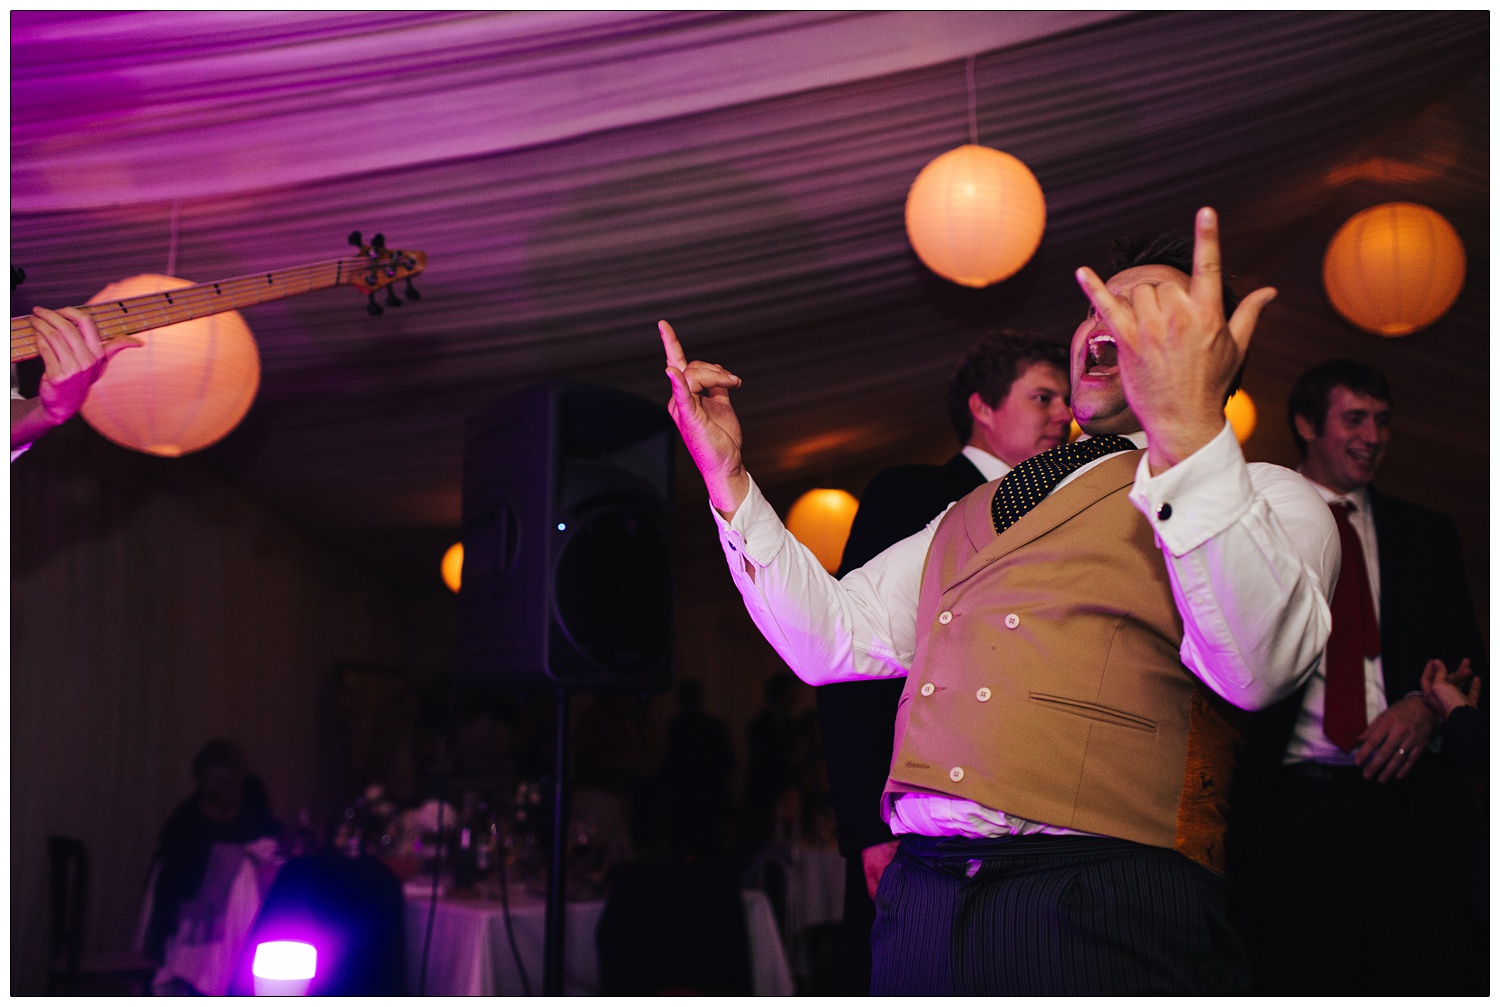 Man doing rock fingers,sign of the horns, in a marquee lit with purple lights at a wedding. He is wearing a waistcoat and tie.